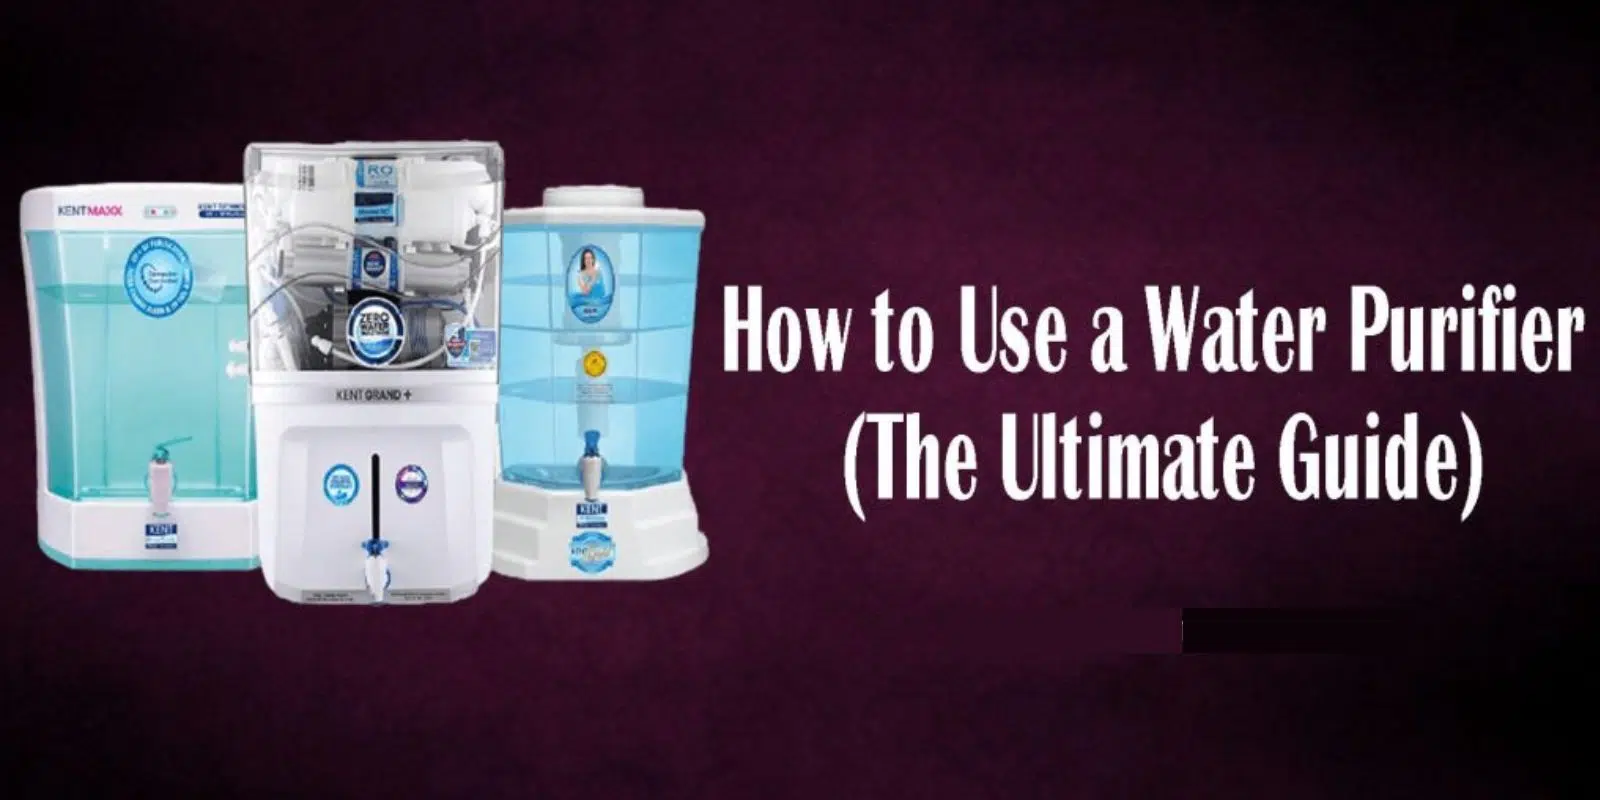 How to Use a Water Purifier? [Step by step guide]